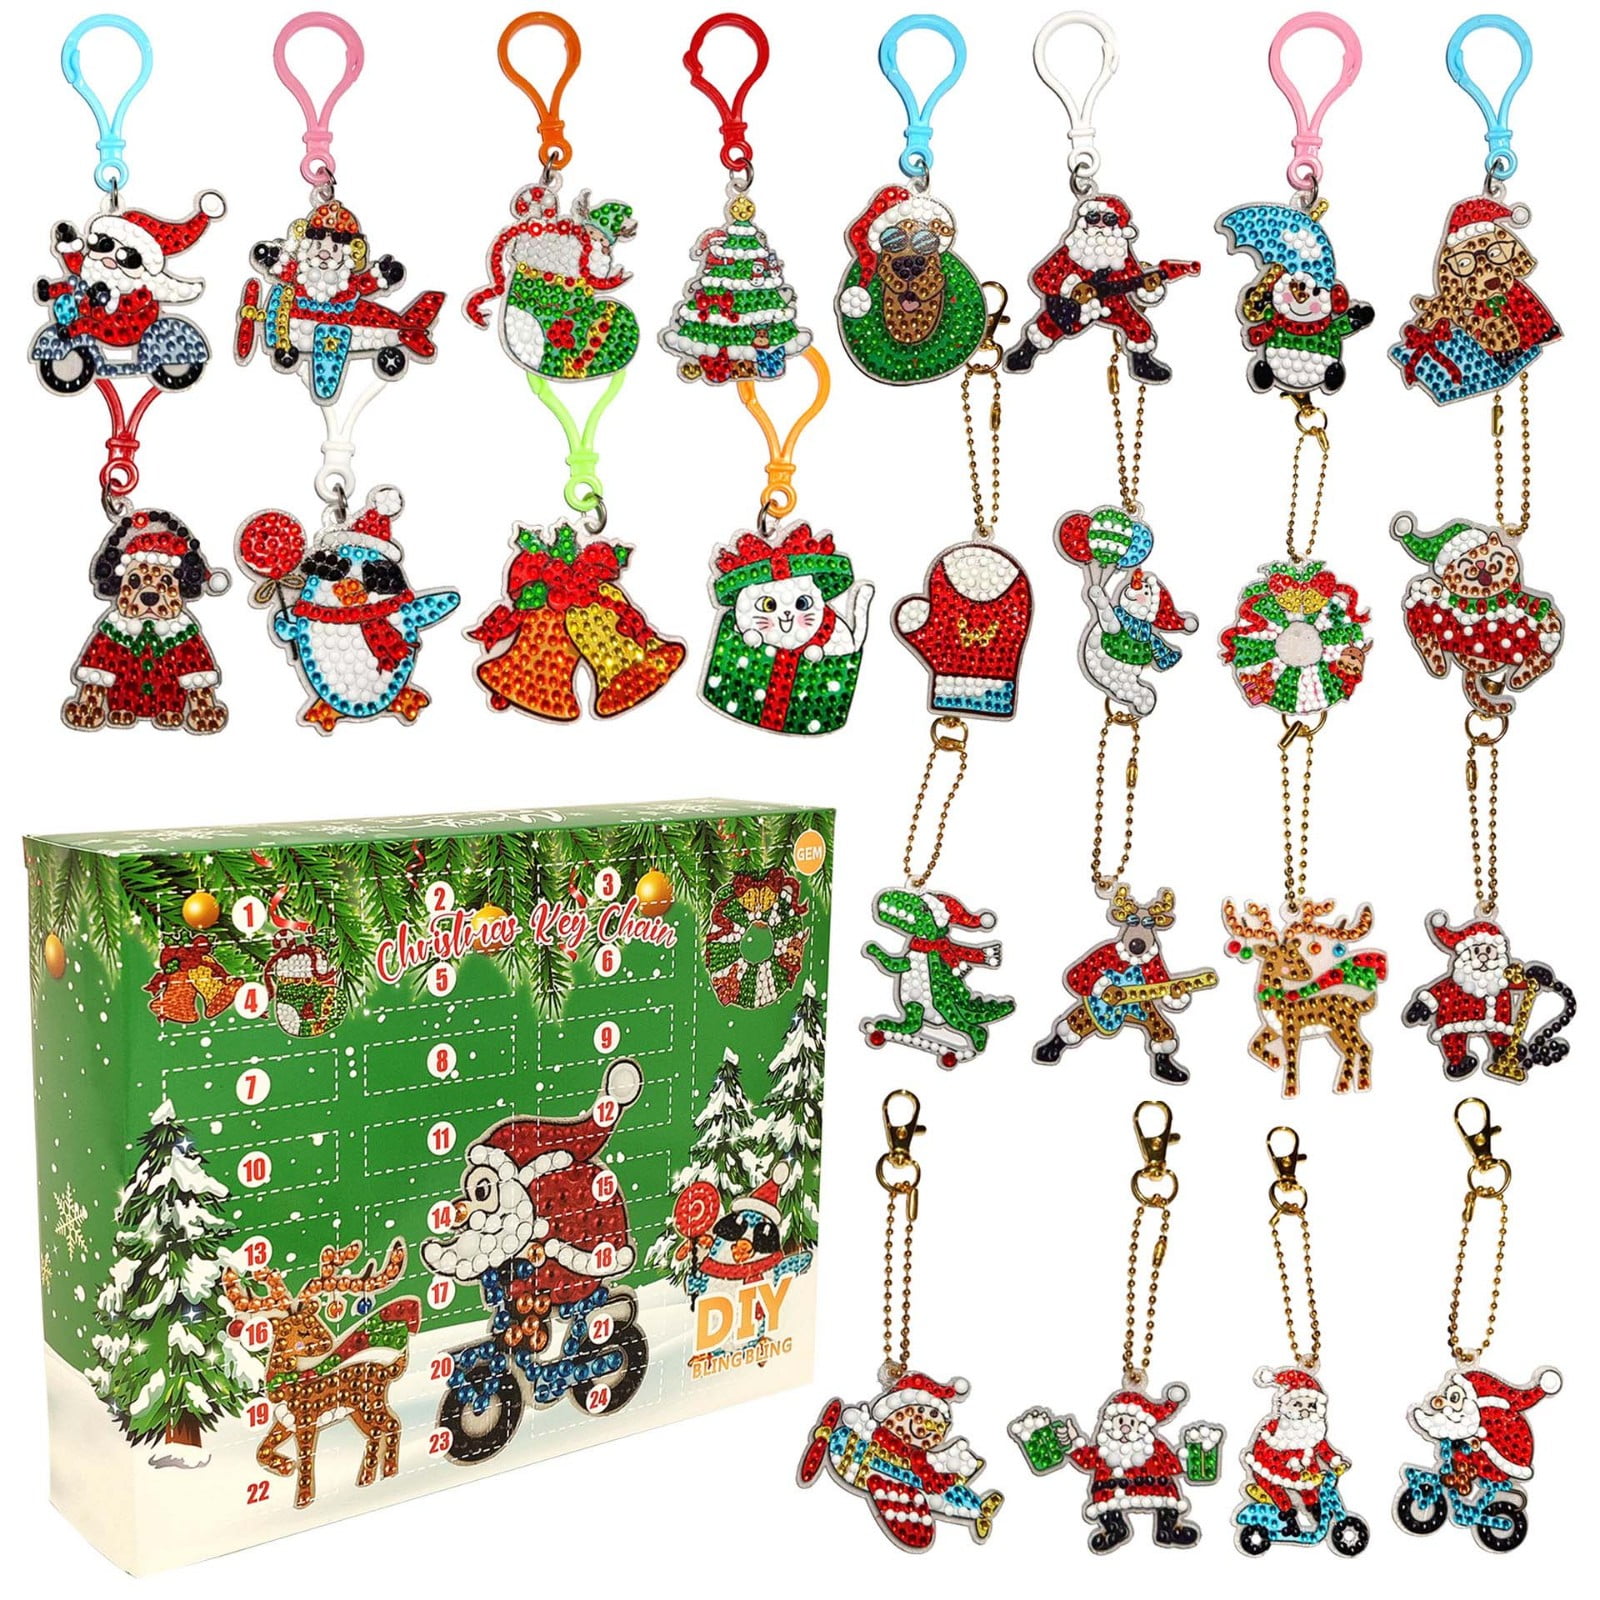 Autrucker Christmas Diamond Painting Kits Christmas 2022 Advent Calendar, Christmas Countdown Christmas Ornaments with 8 Keychains and Resin Ornaments